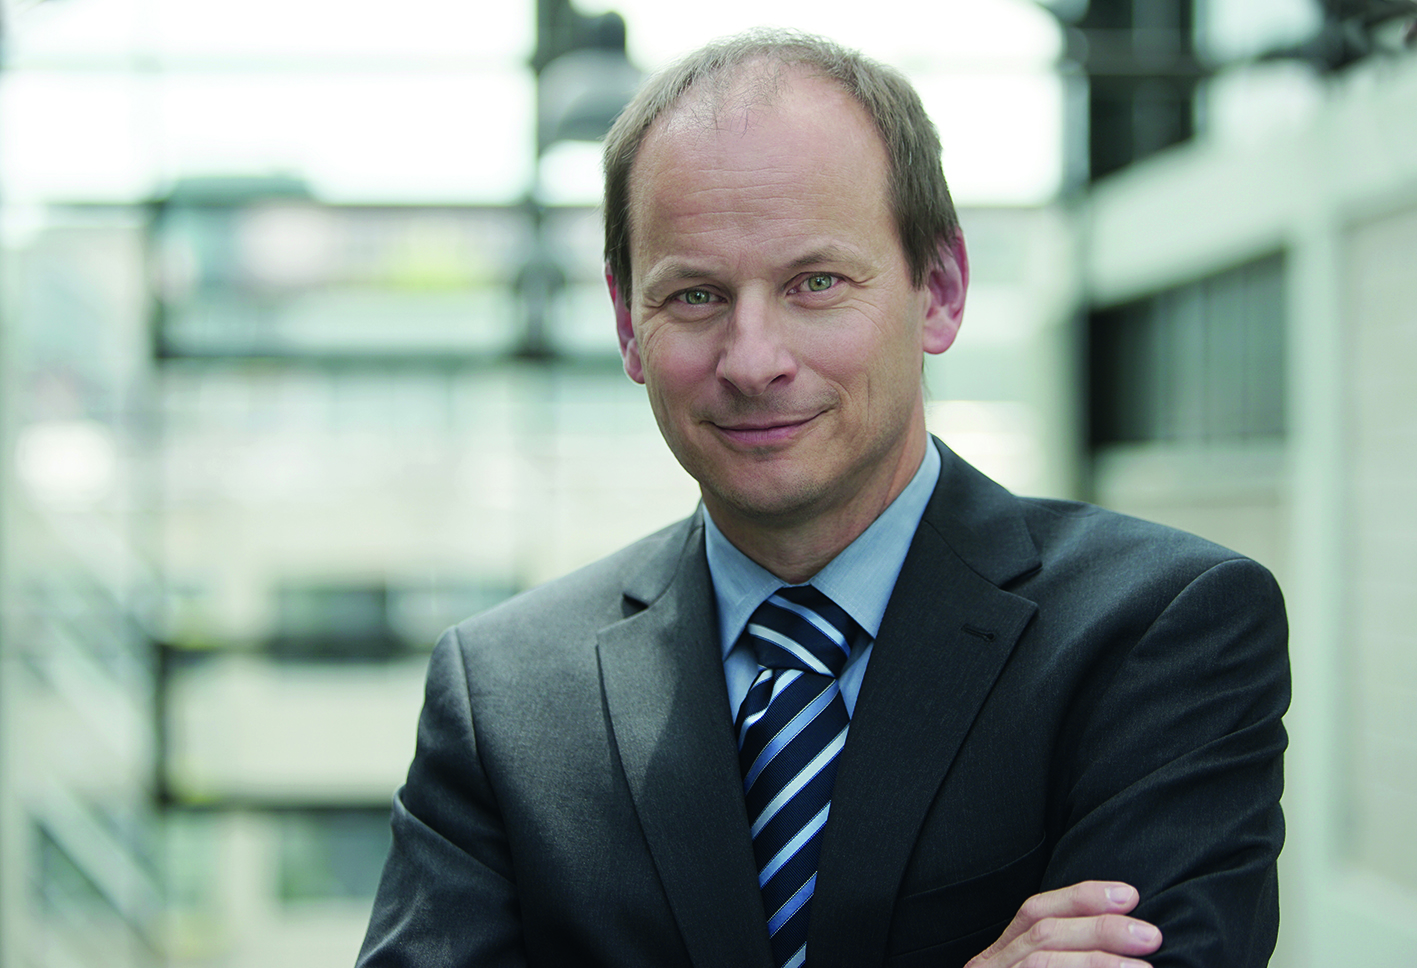 Dr Constantin Häfner has been appointed the new director of the Fraunhofer Institute for Laser Technology (ILT).